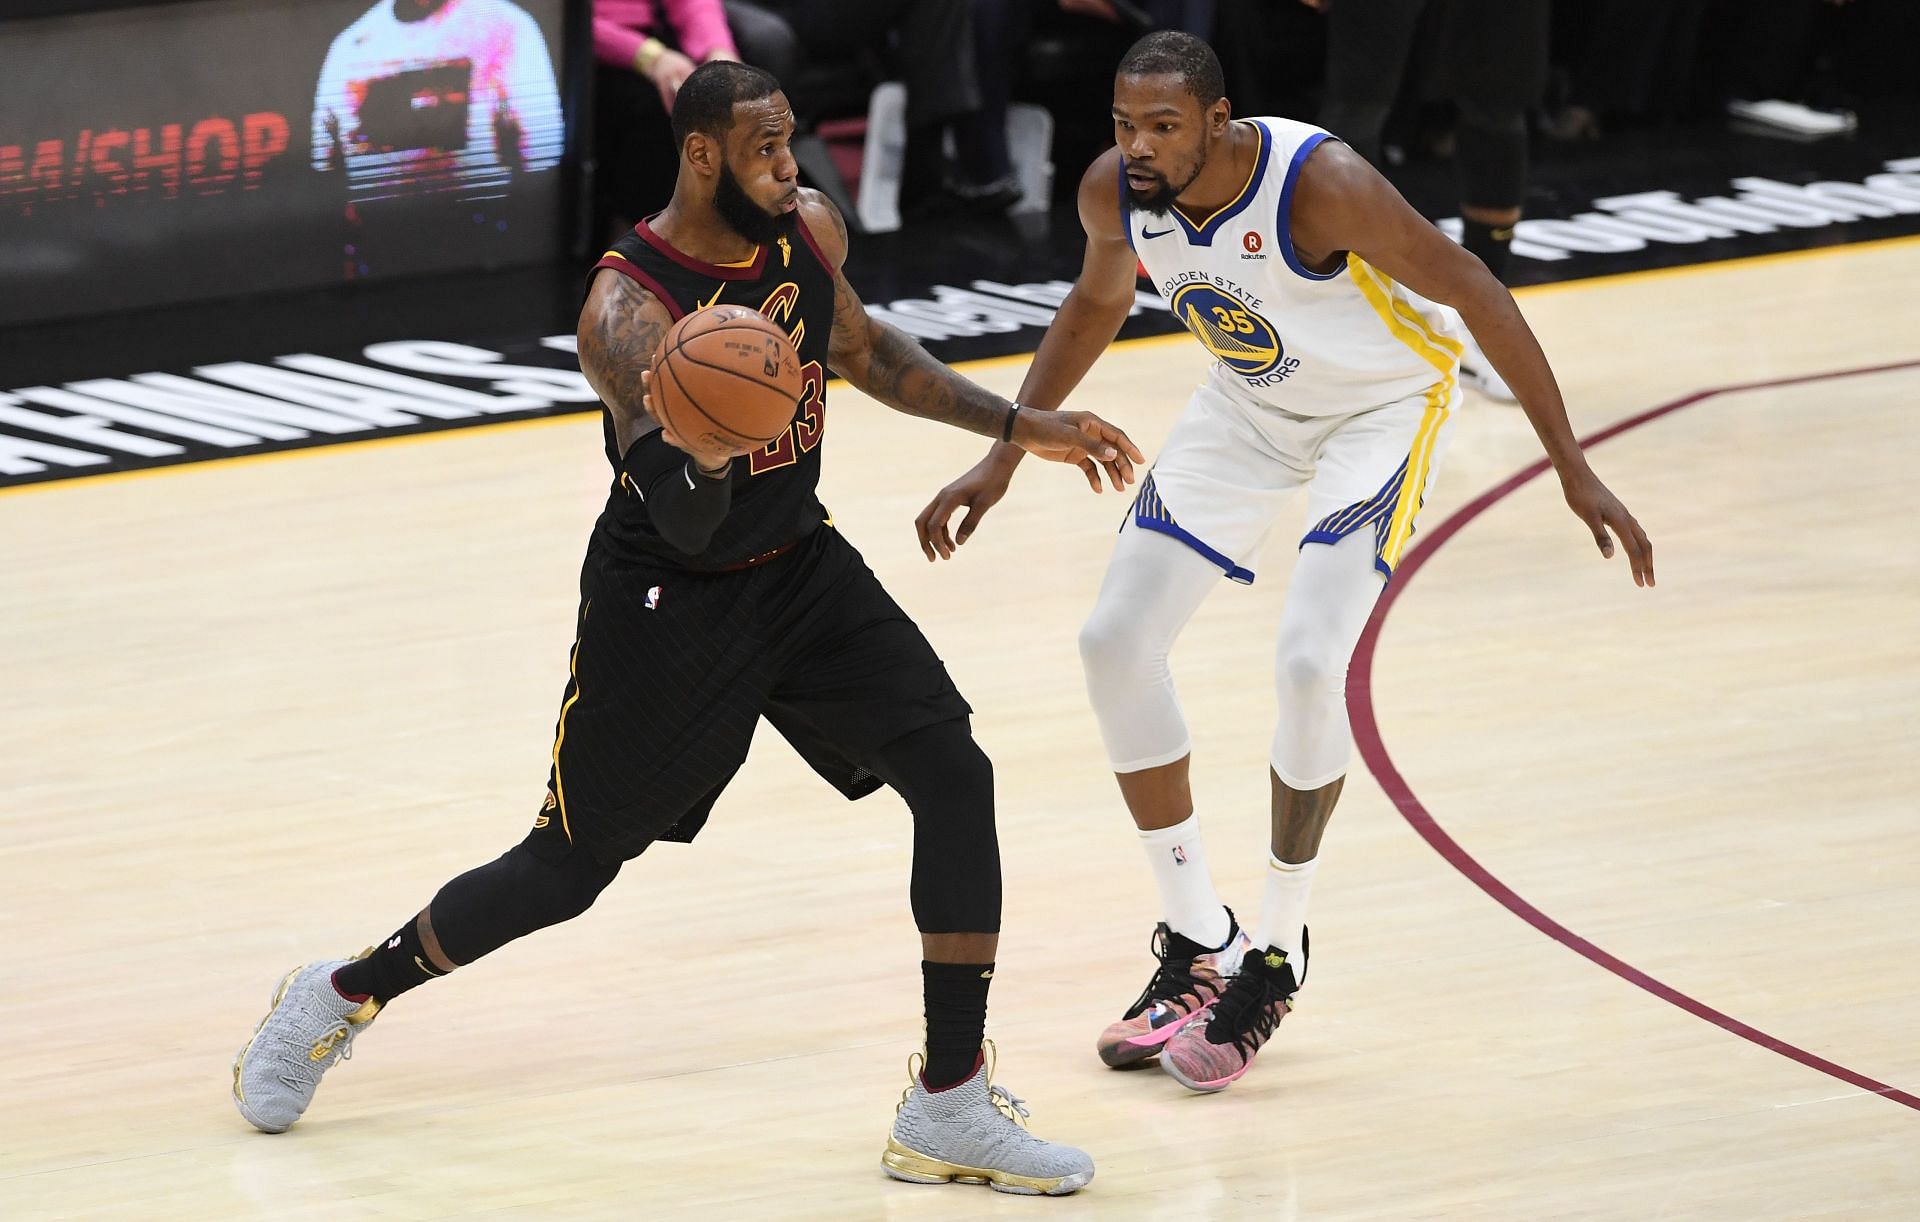 LeBron James of the Cleveland Cavaliers controls the ball against Kevin Durant of the Golden State Warriors